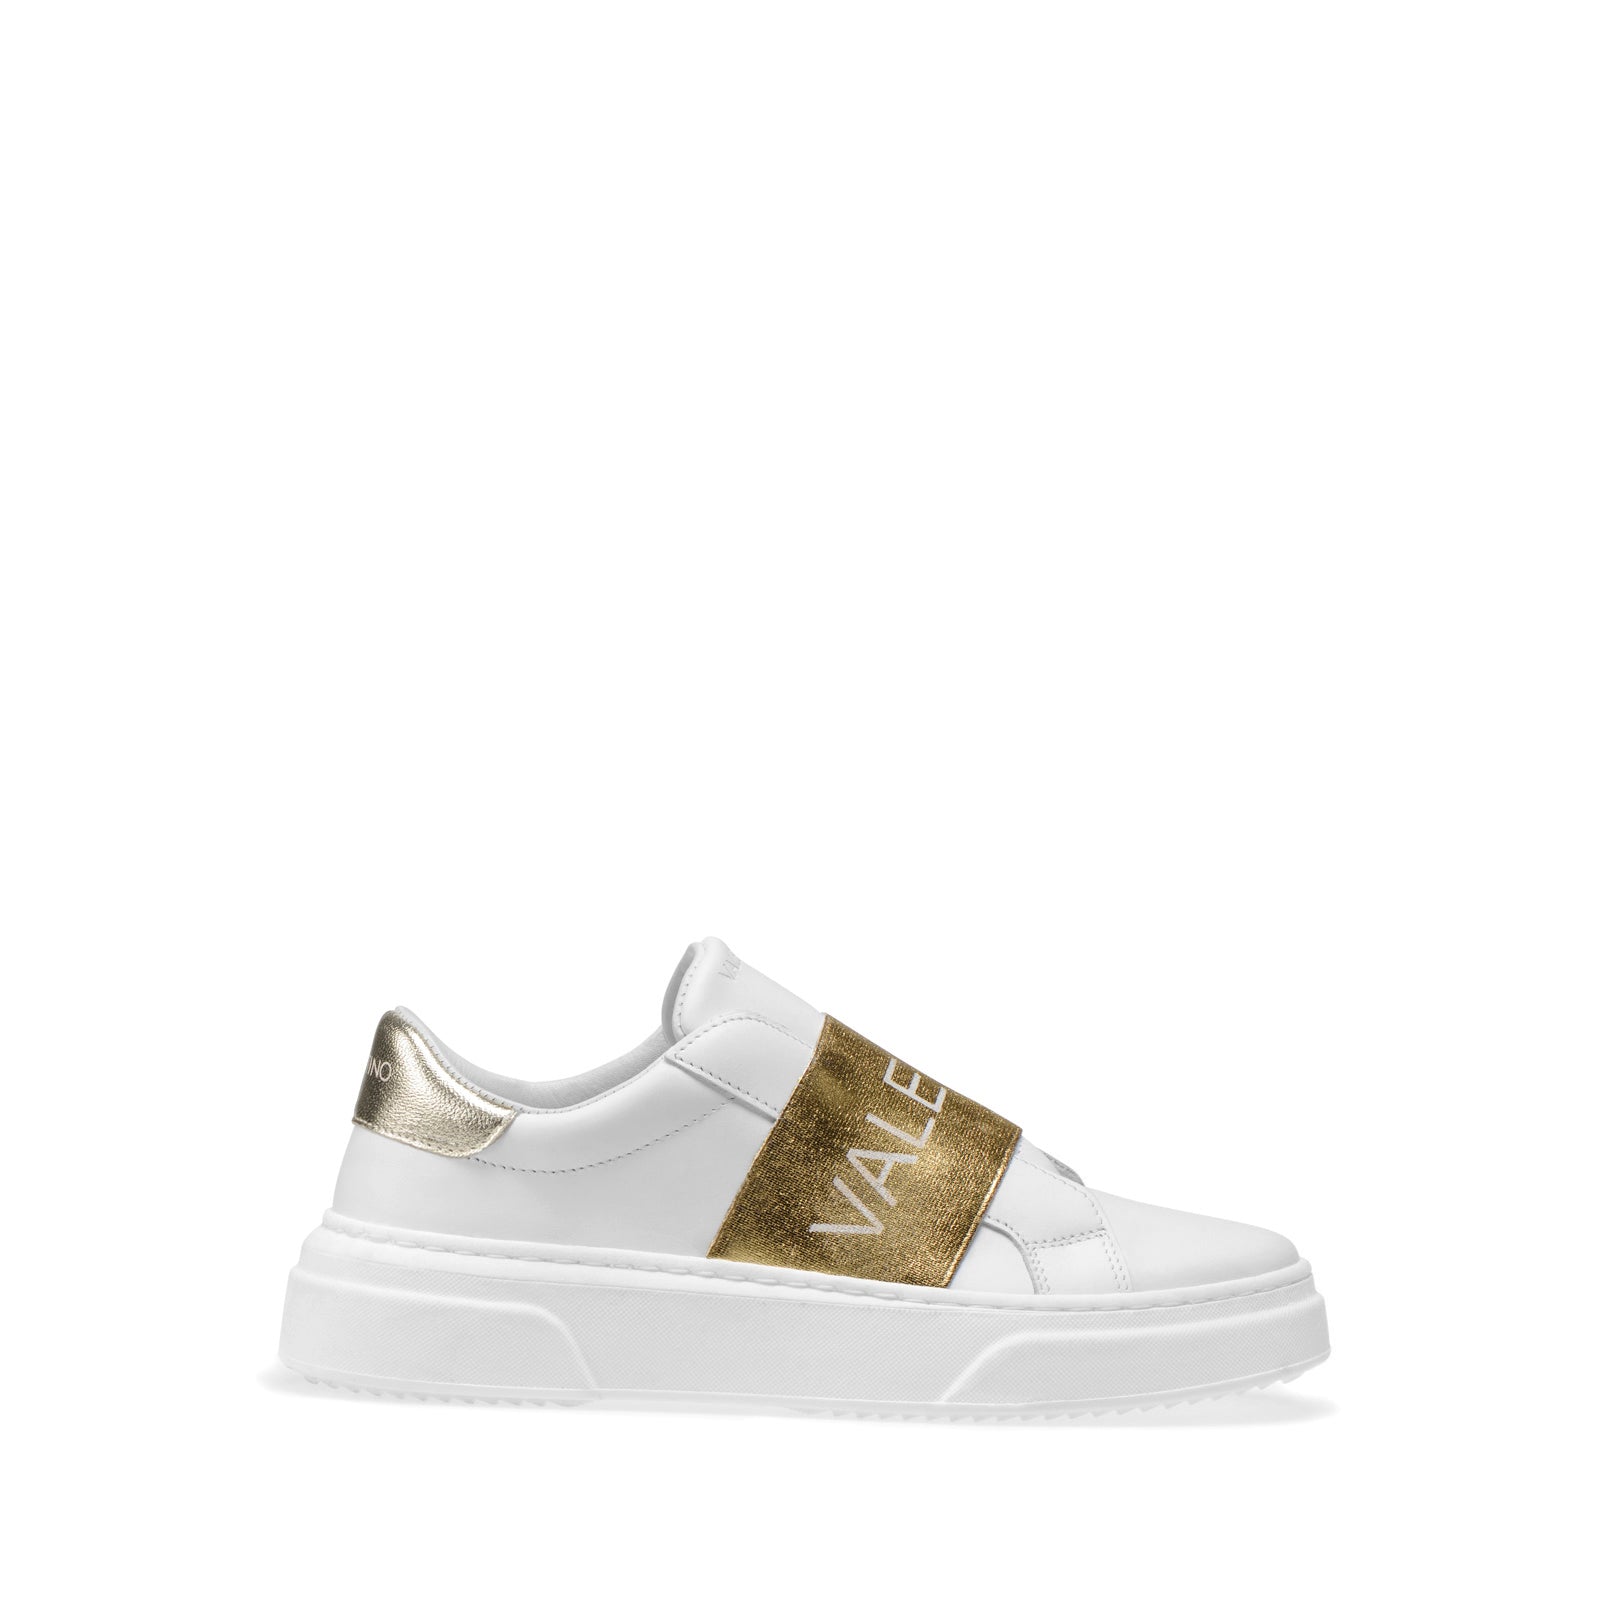 Sneakers Slip-On for Women in White Leather and Gold Detail – Valentino Shoes